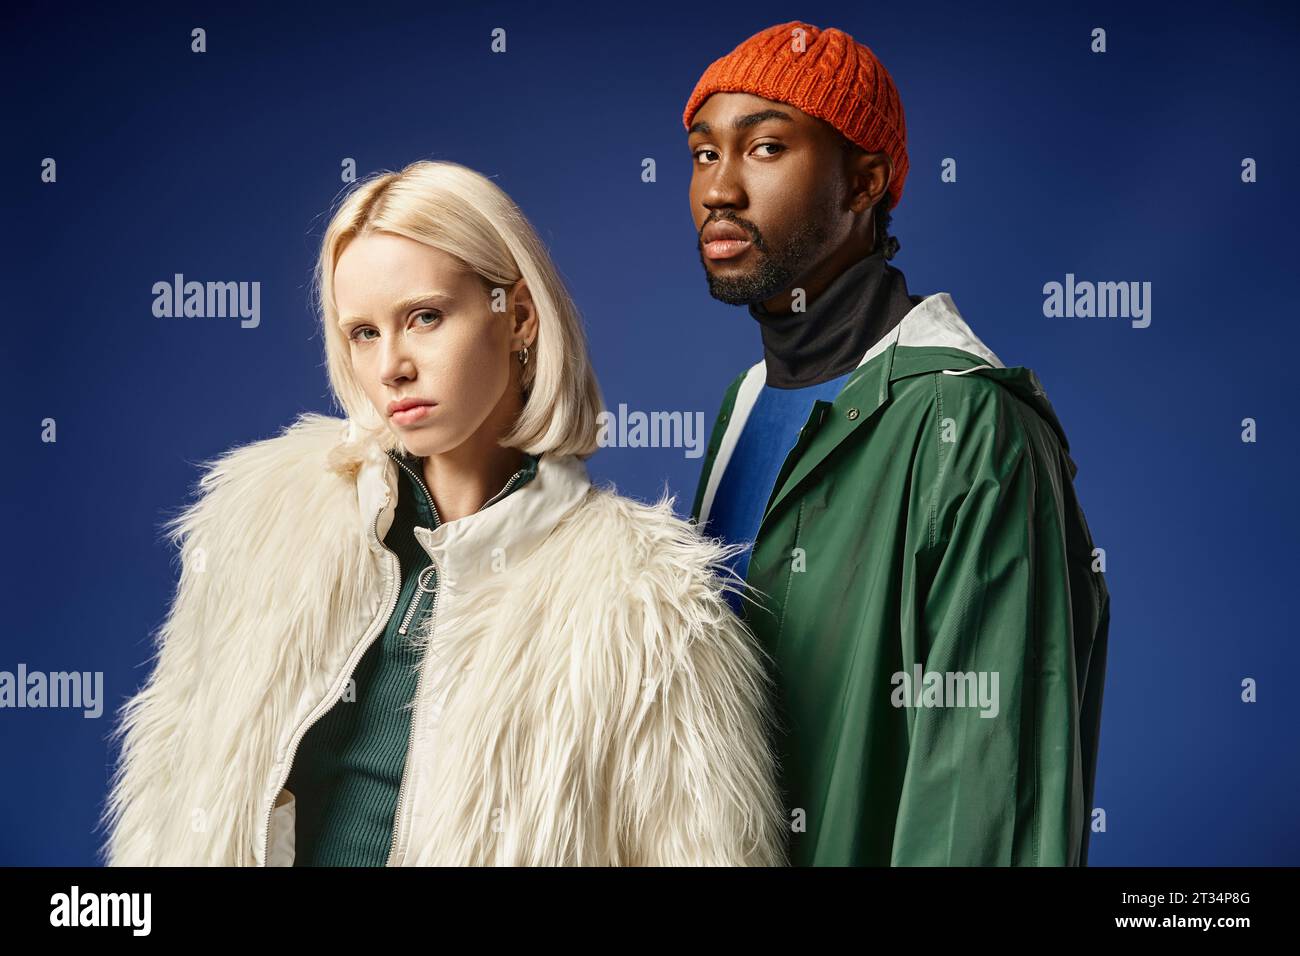 blonde woman posing with african american man in winter attire, trendy models on blue backdrop Stock Photo